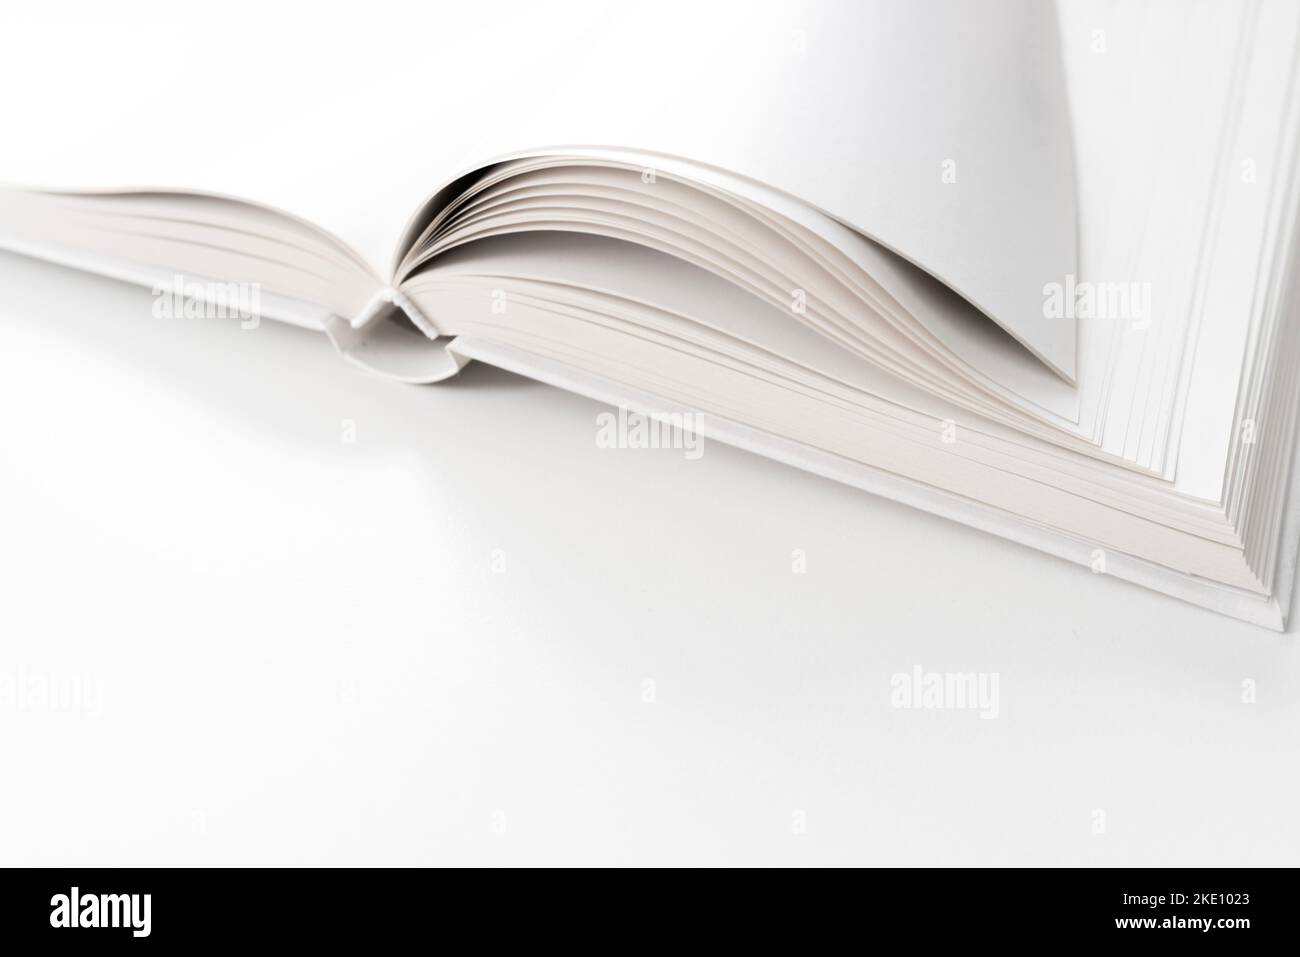 close-up view of blank page open hardback book on white desk Stock Photo